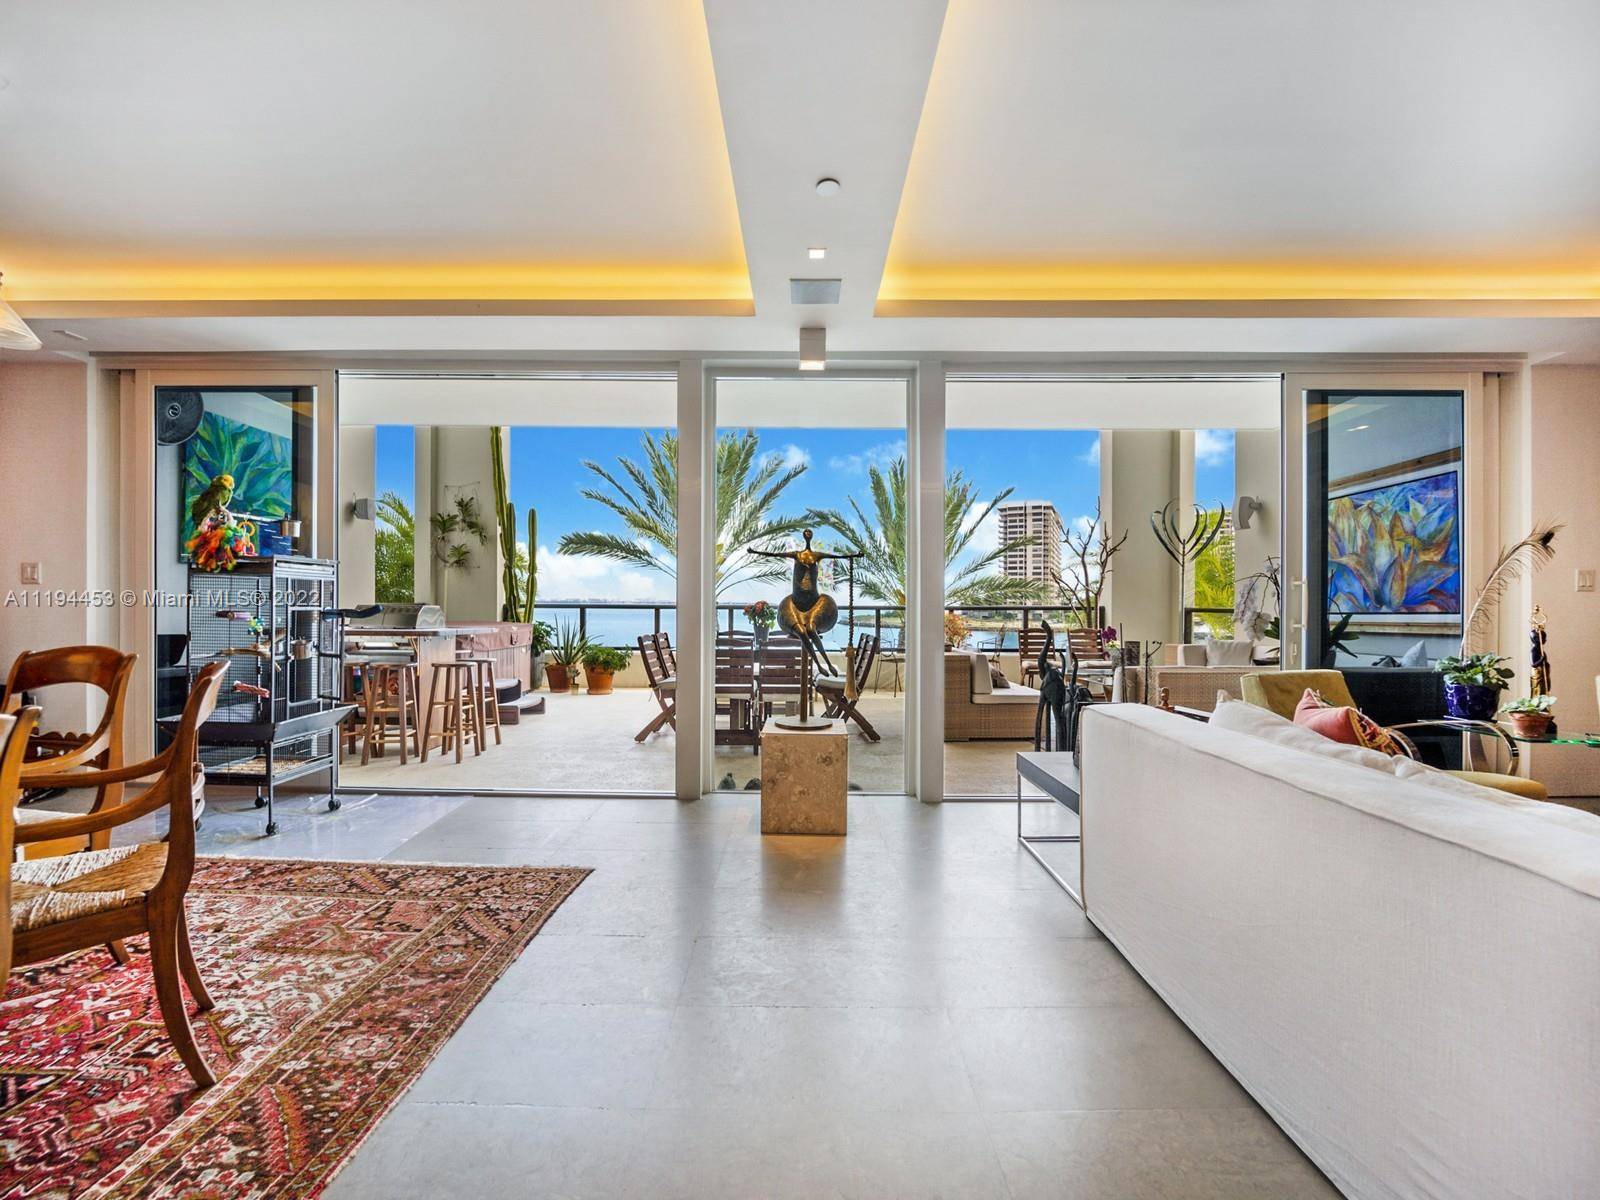 Sophisticatedly tropical along Biscayne Bay is this 2 STORY 3 bed, 4 ½ bath residence located in the exclusive Residences of Vizcaya in Coconut Grove.